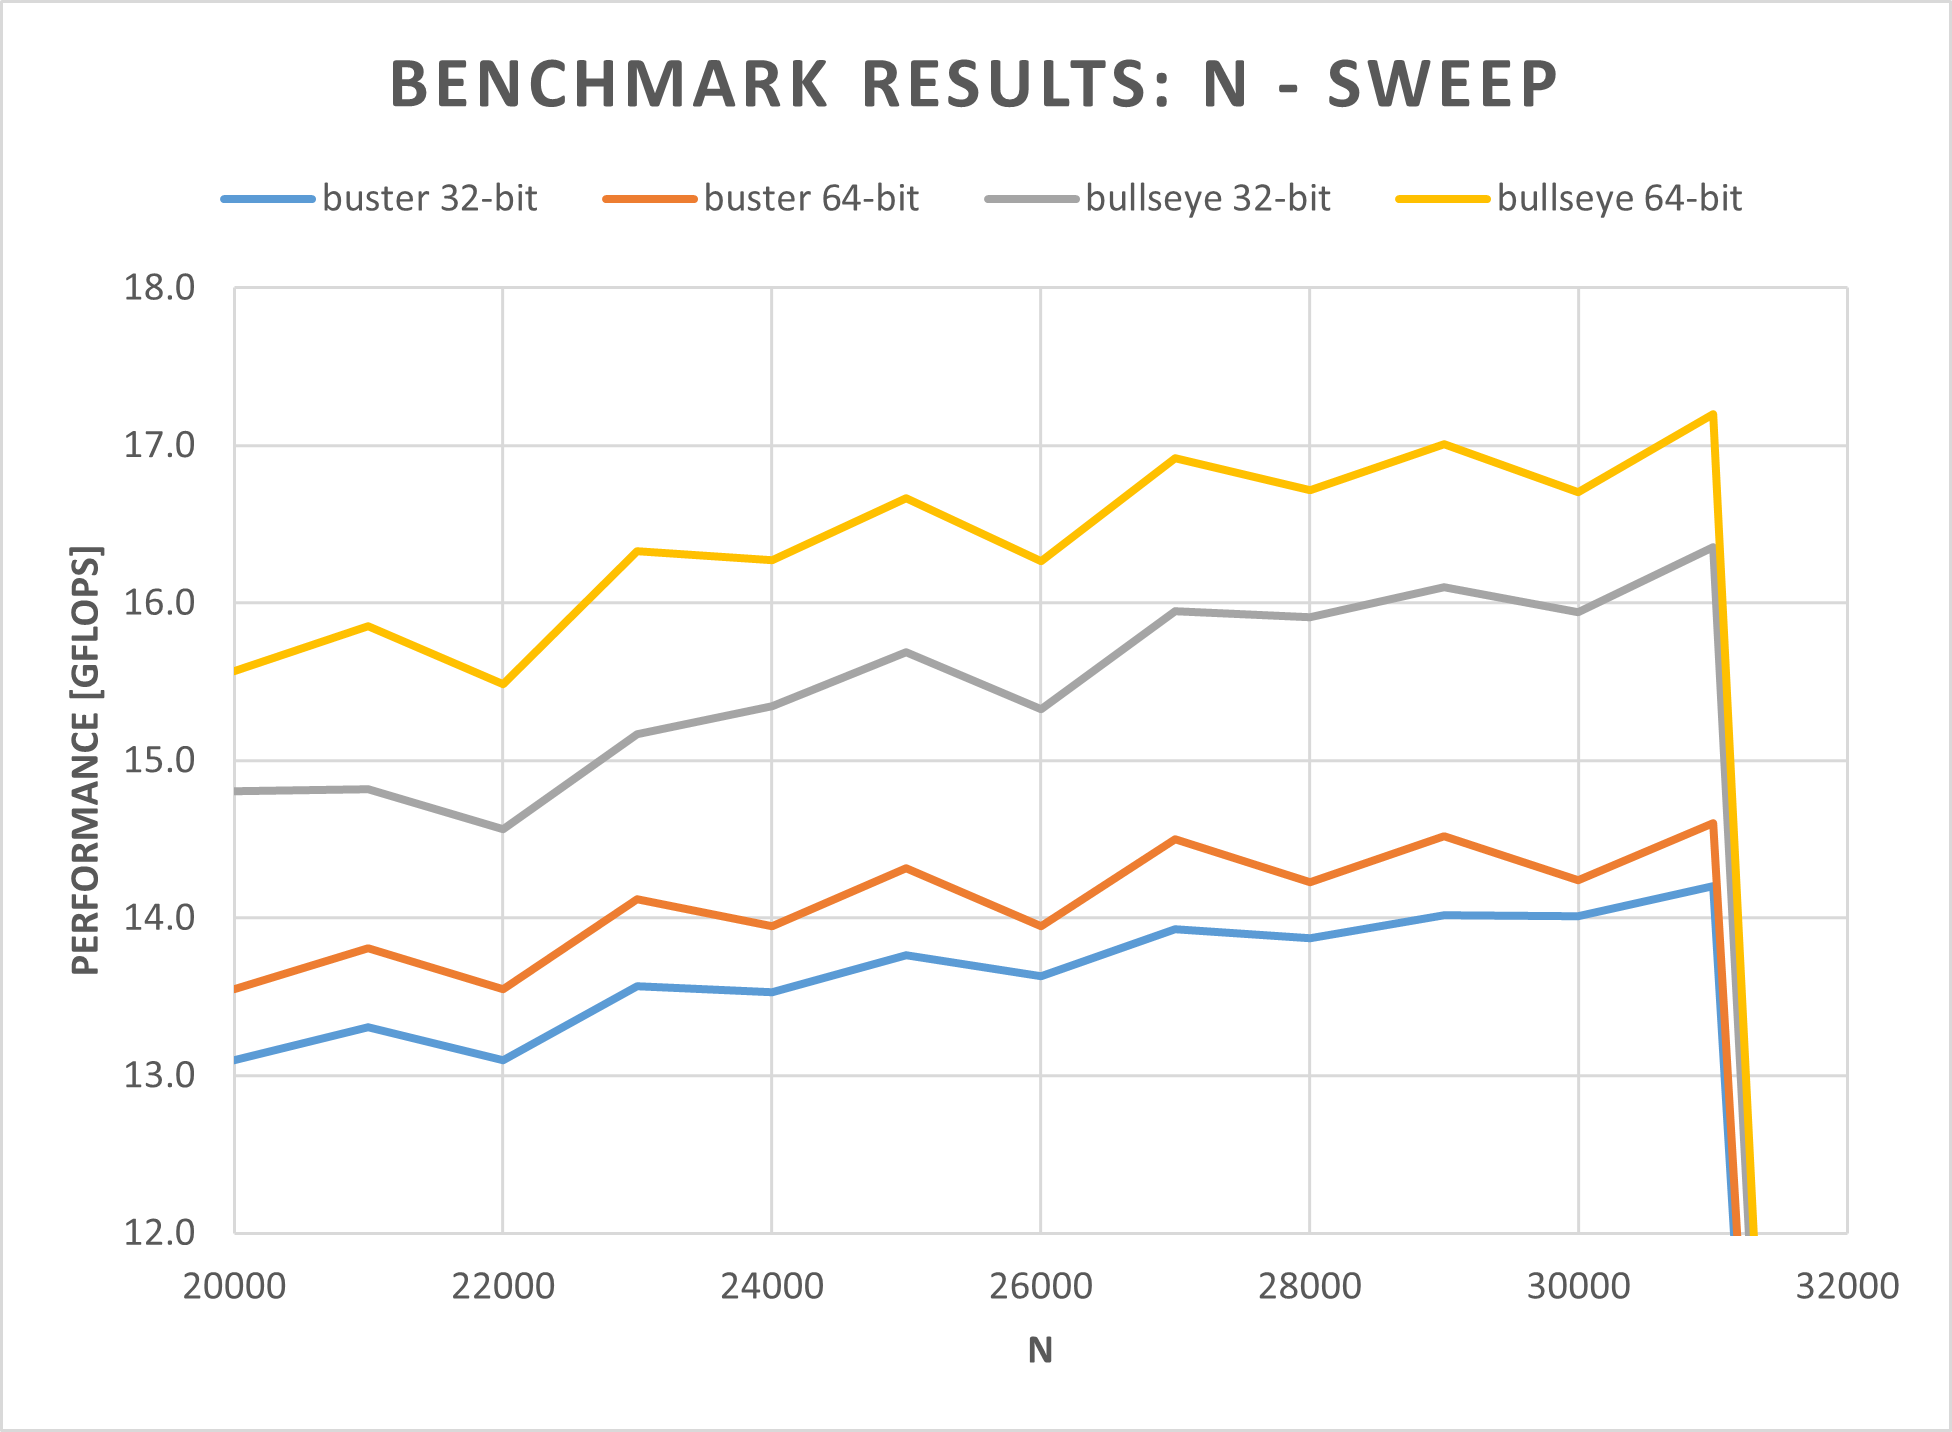 figure of the N sweep benchmark results